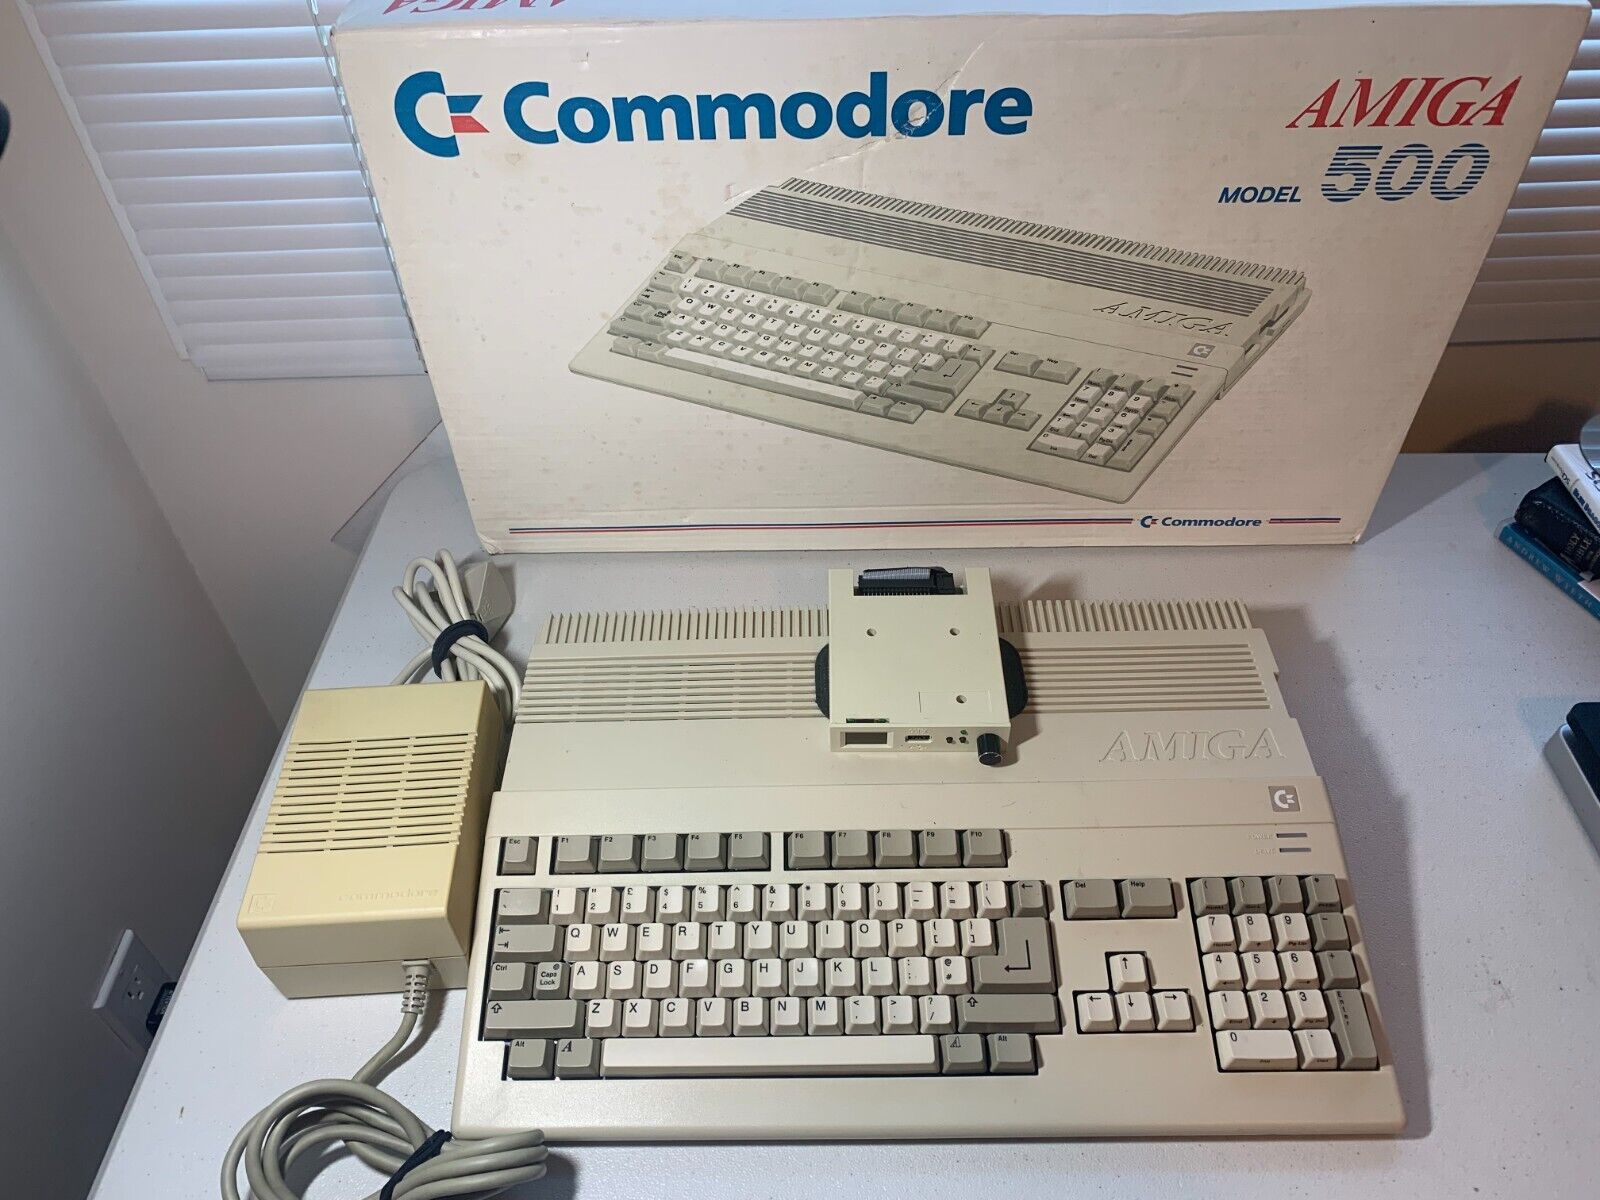 Vintage Commodore Amiga 500 Personal Computer In Box With Gotek Tested